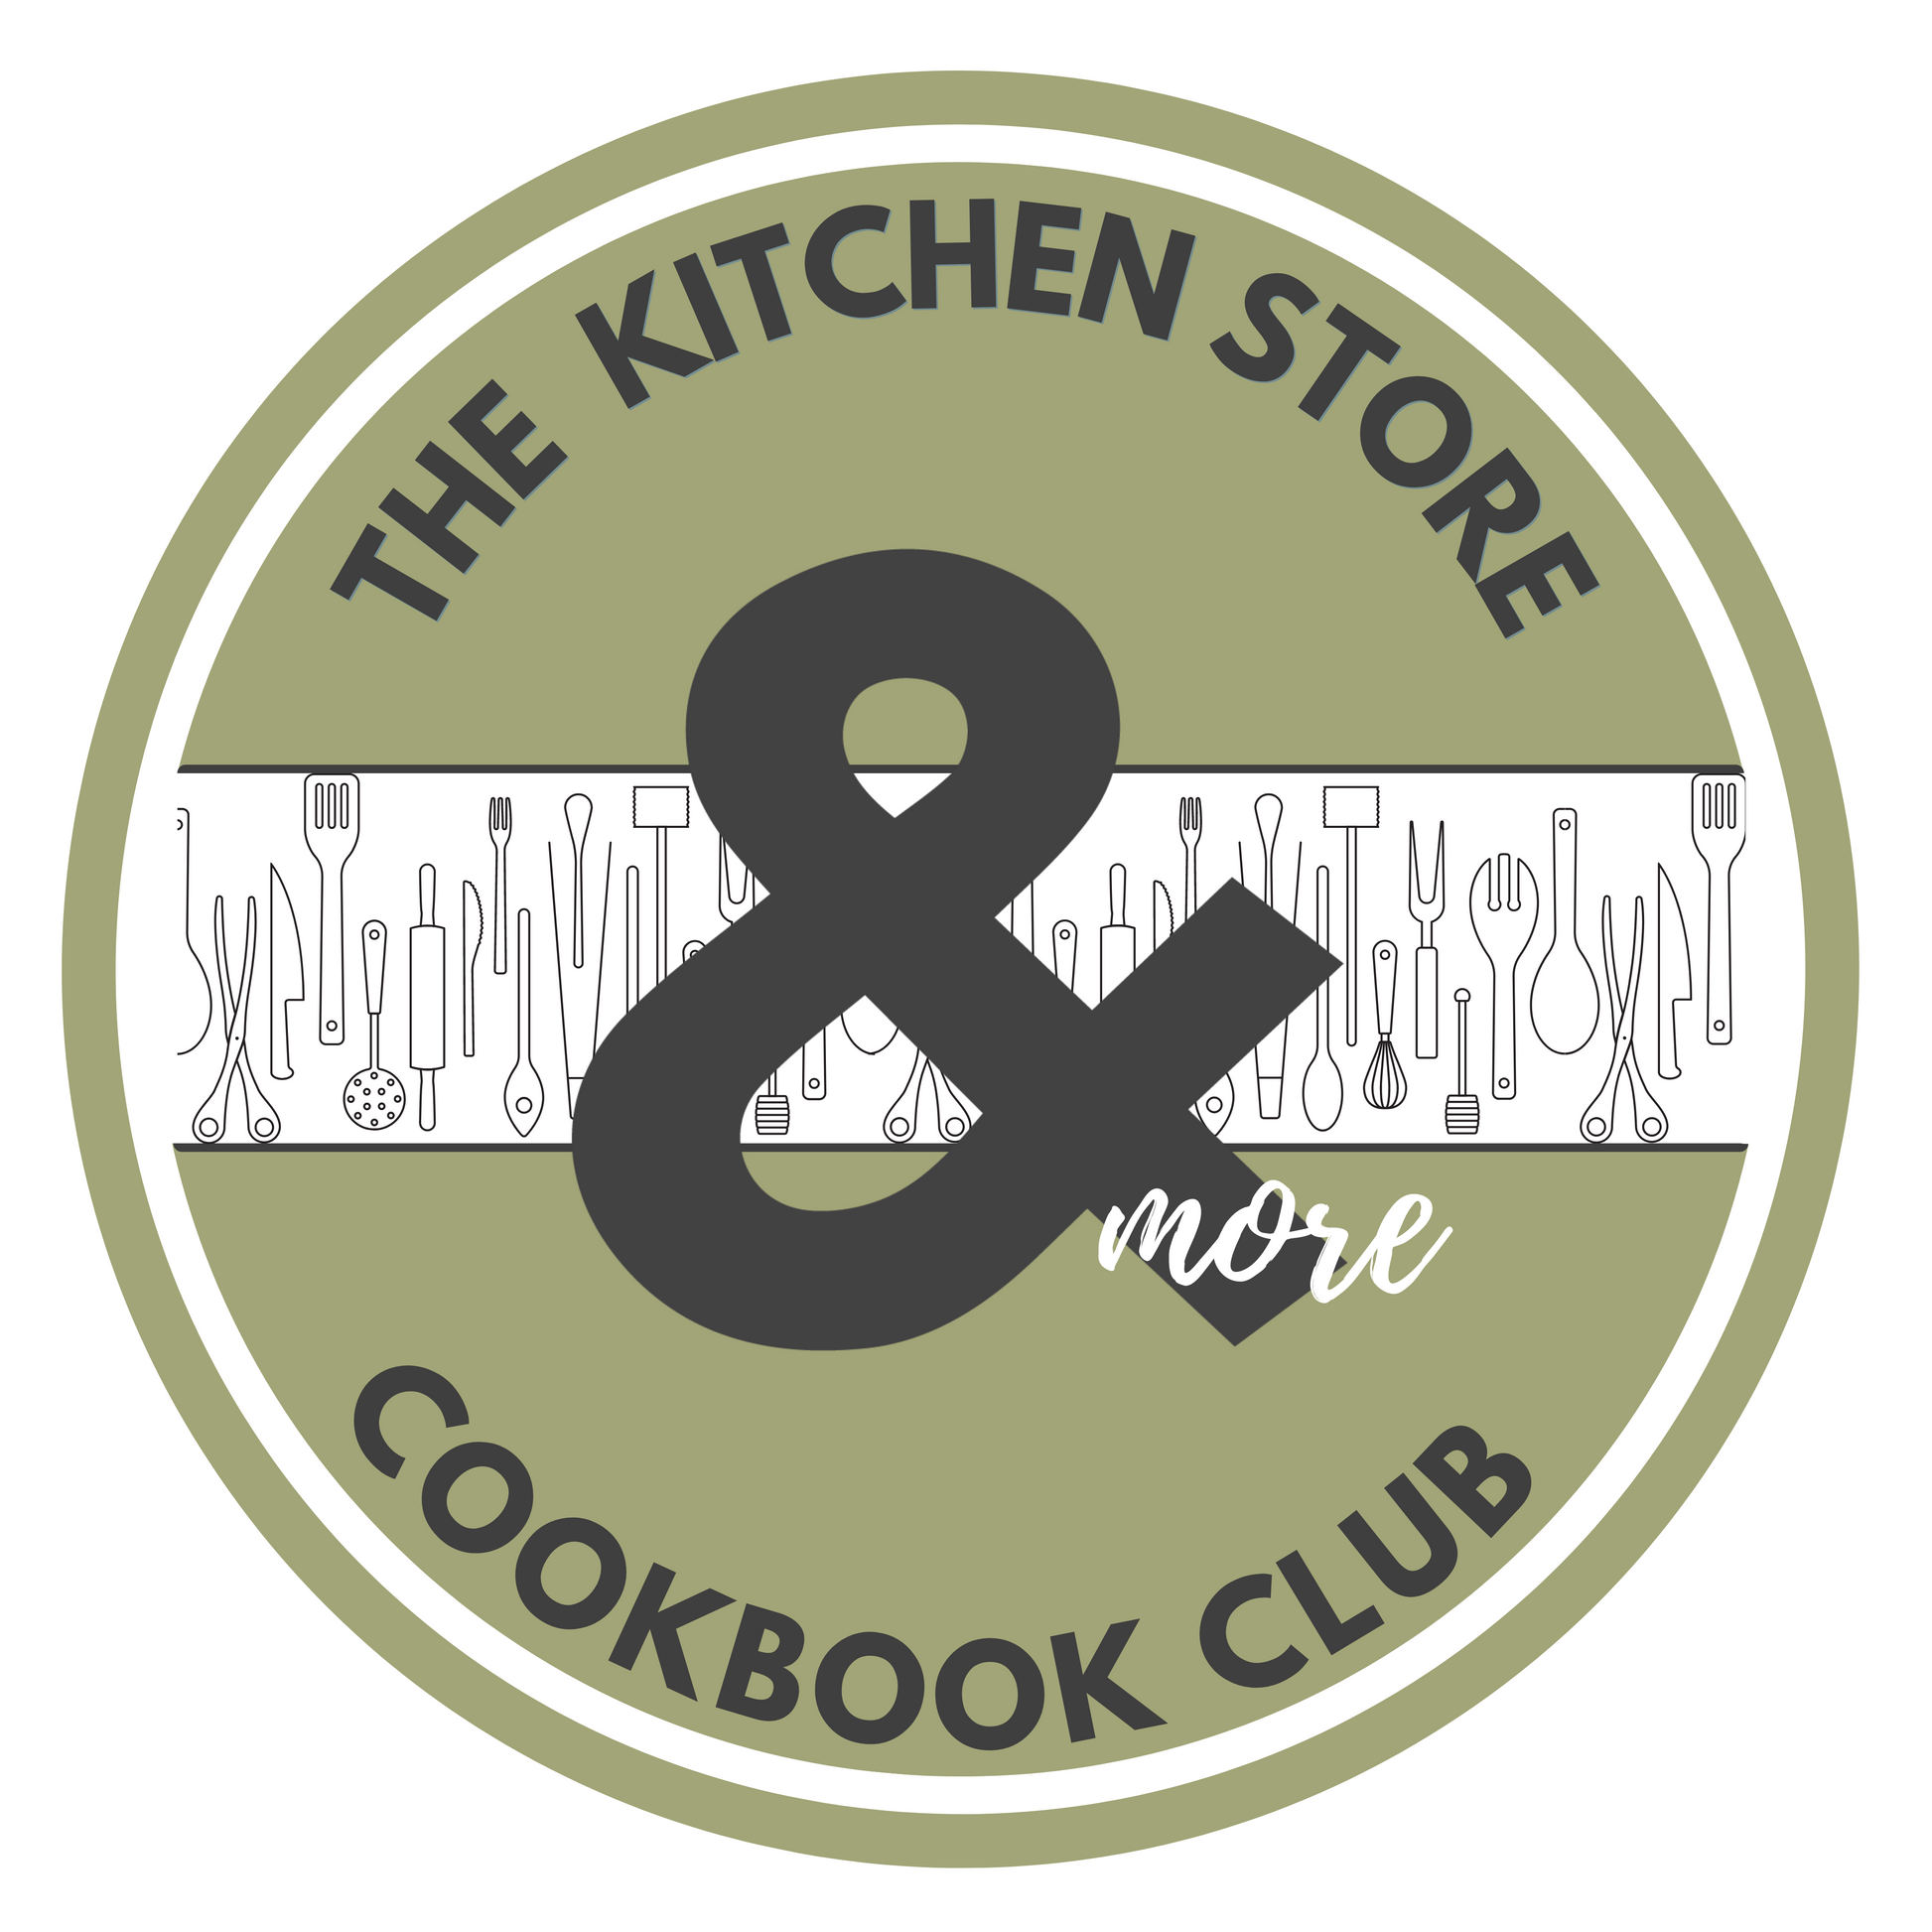 The Kitchen Store Cookbook Club logo wiith the ampersand symbol in the middle